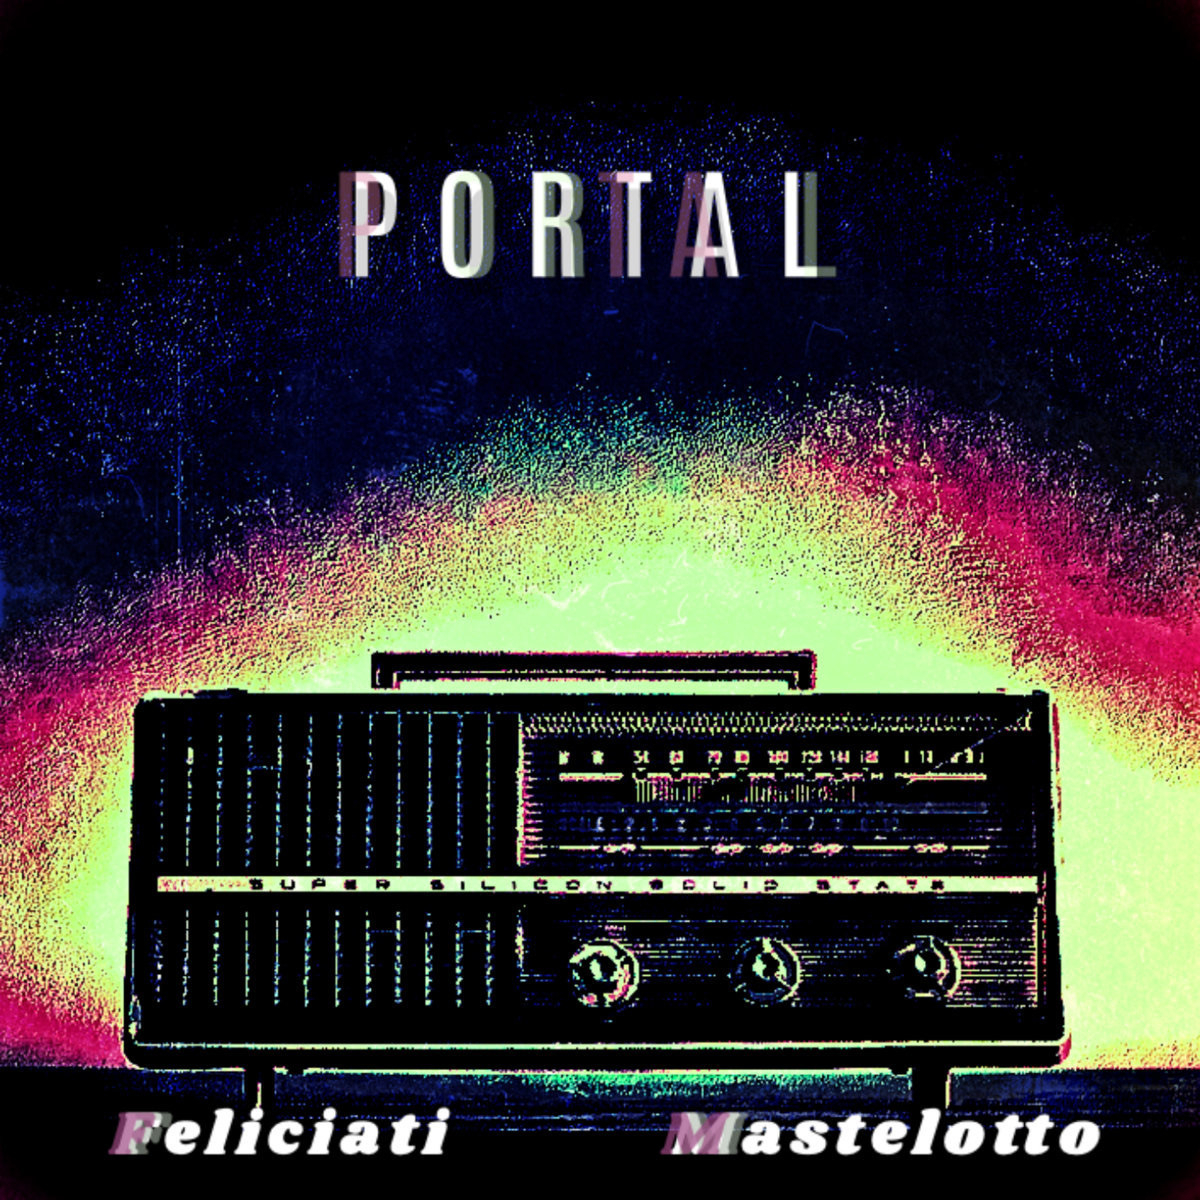 Album cover: A photo of an old Super Silicon Solid State radio, digitally process to be yellow and red backlit, otherwise very dark, with lots of digital noise.